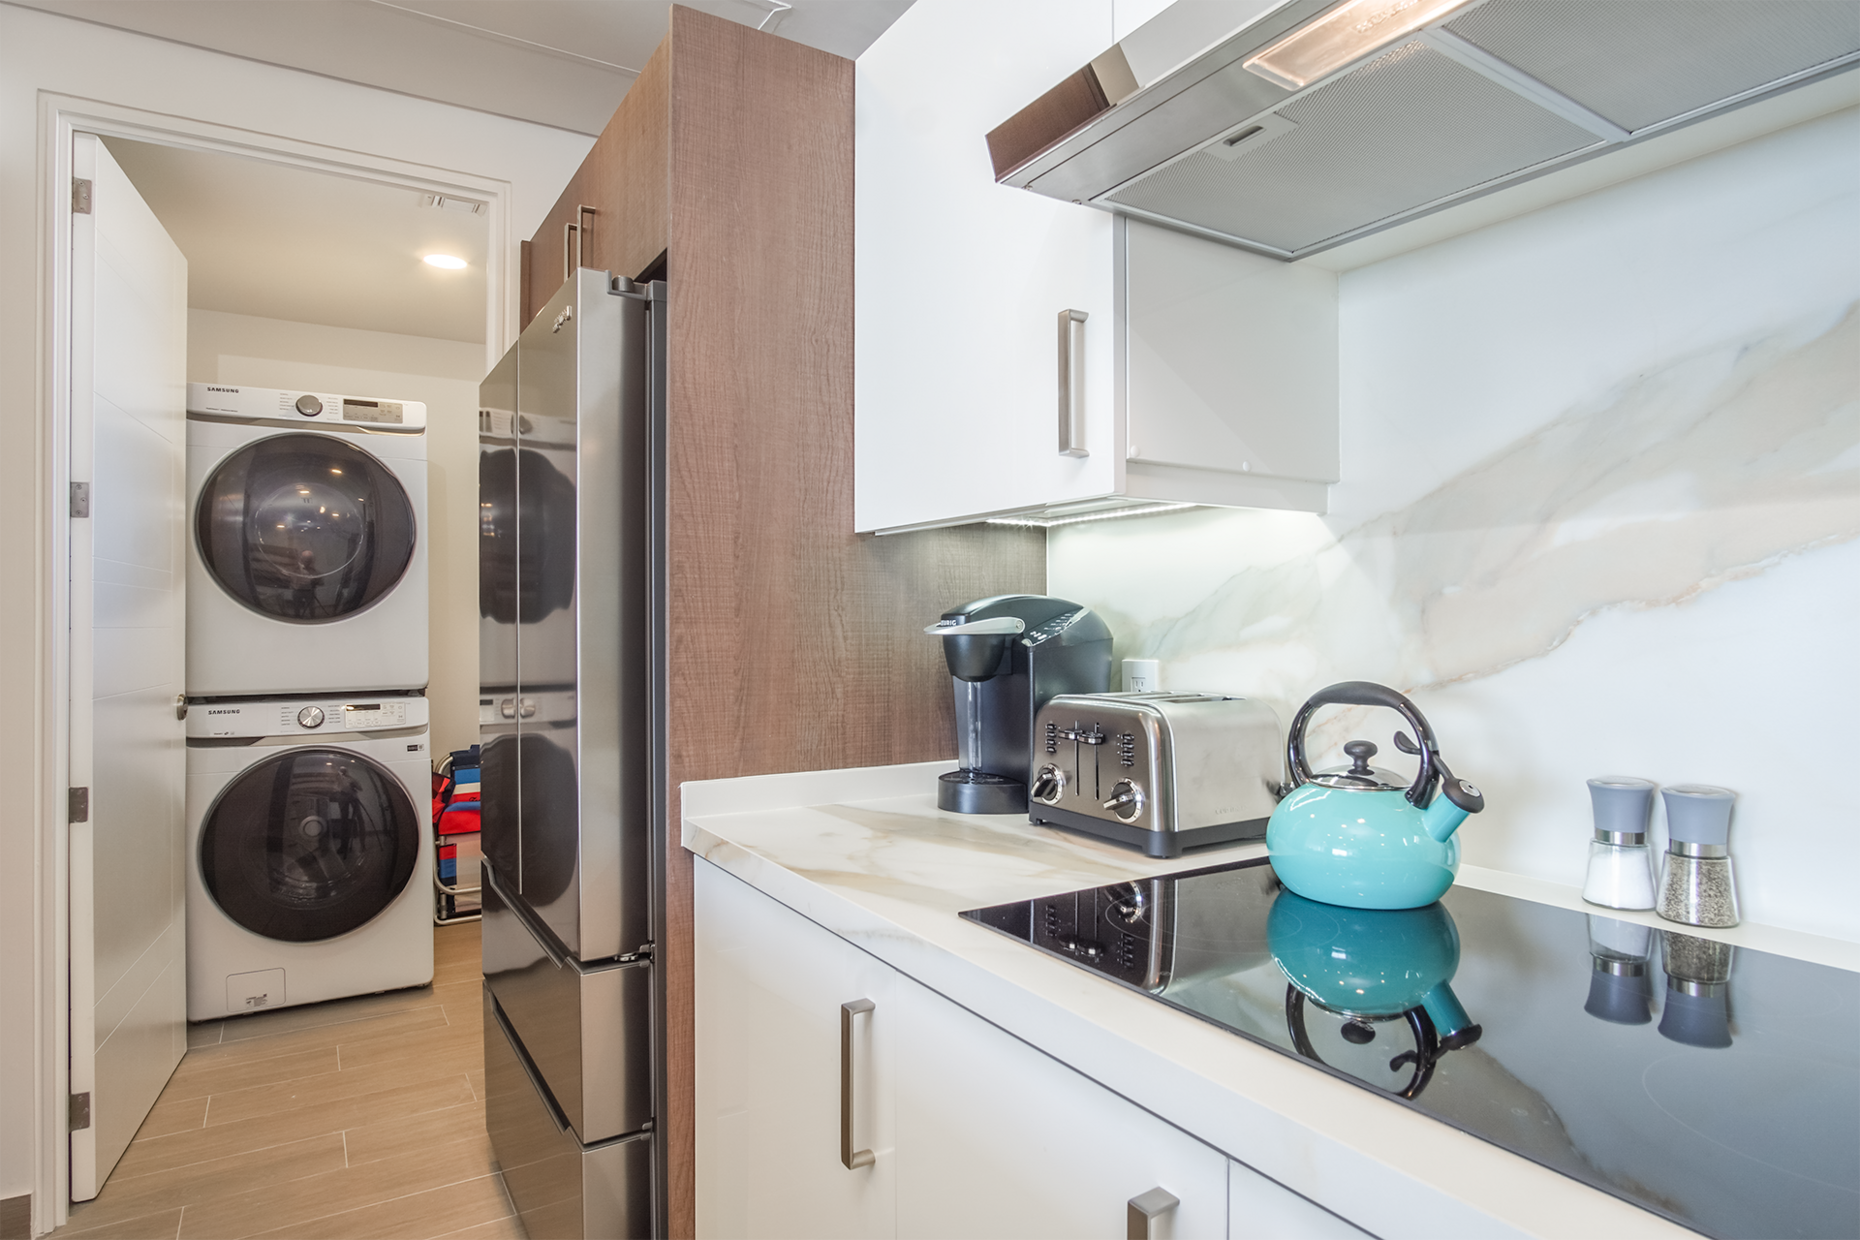 Every appliance large and small that you would want in the kitchen. Spices, Crockpot, pots and pans and so much more. The utility room is complete with beach towels and full size washer and dryer.